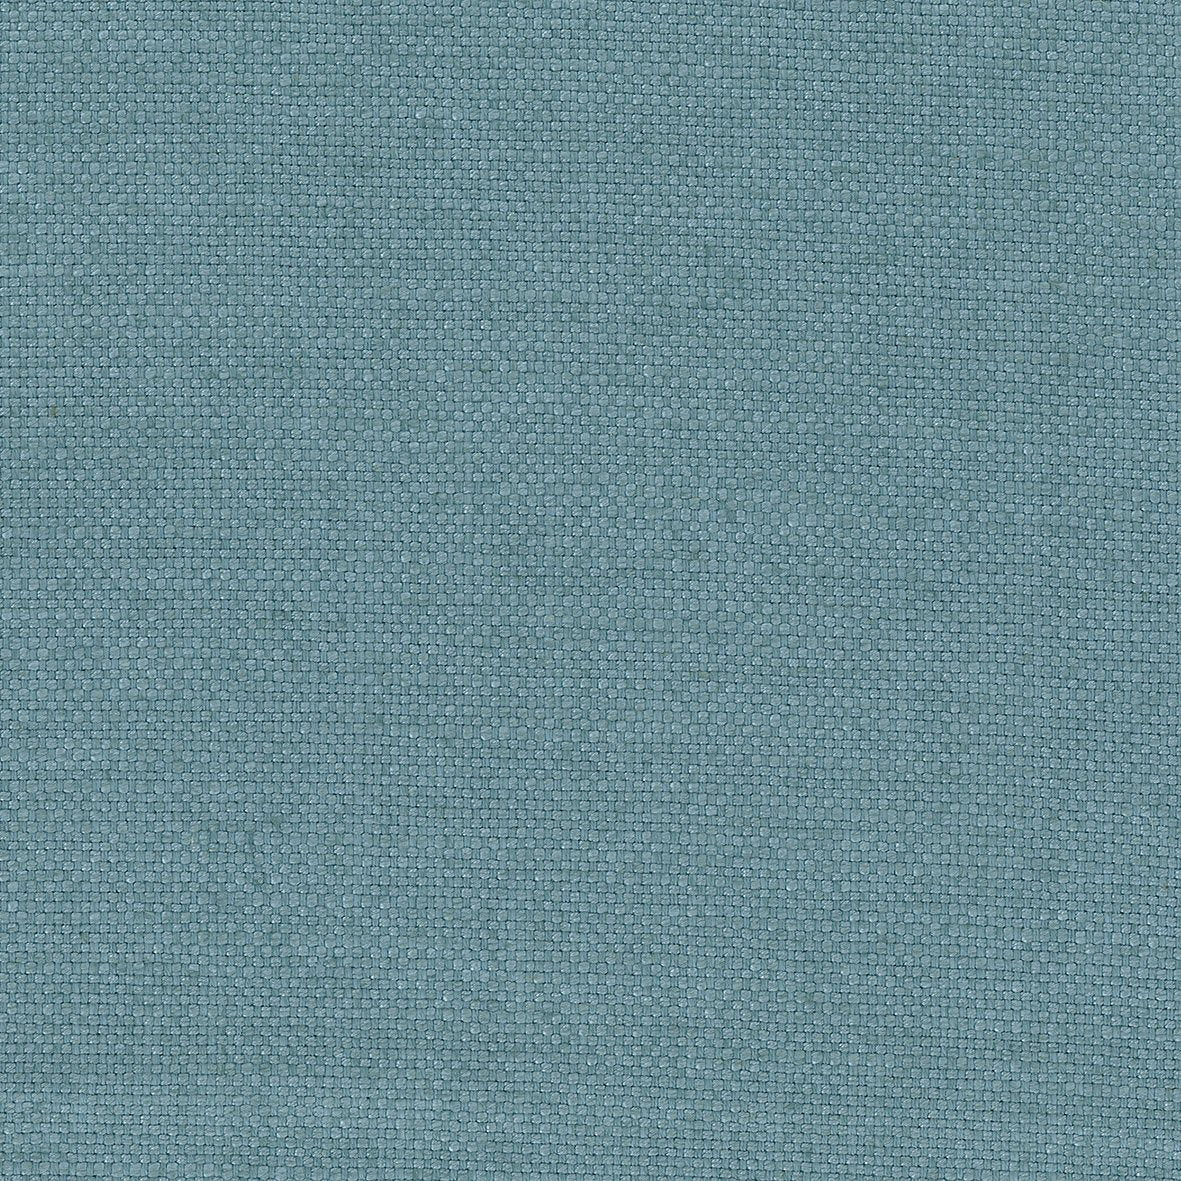 Nina Campbell Fabric - Poquelin Colette China Blue NCF4312-12